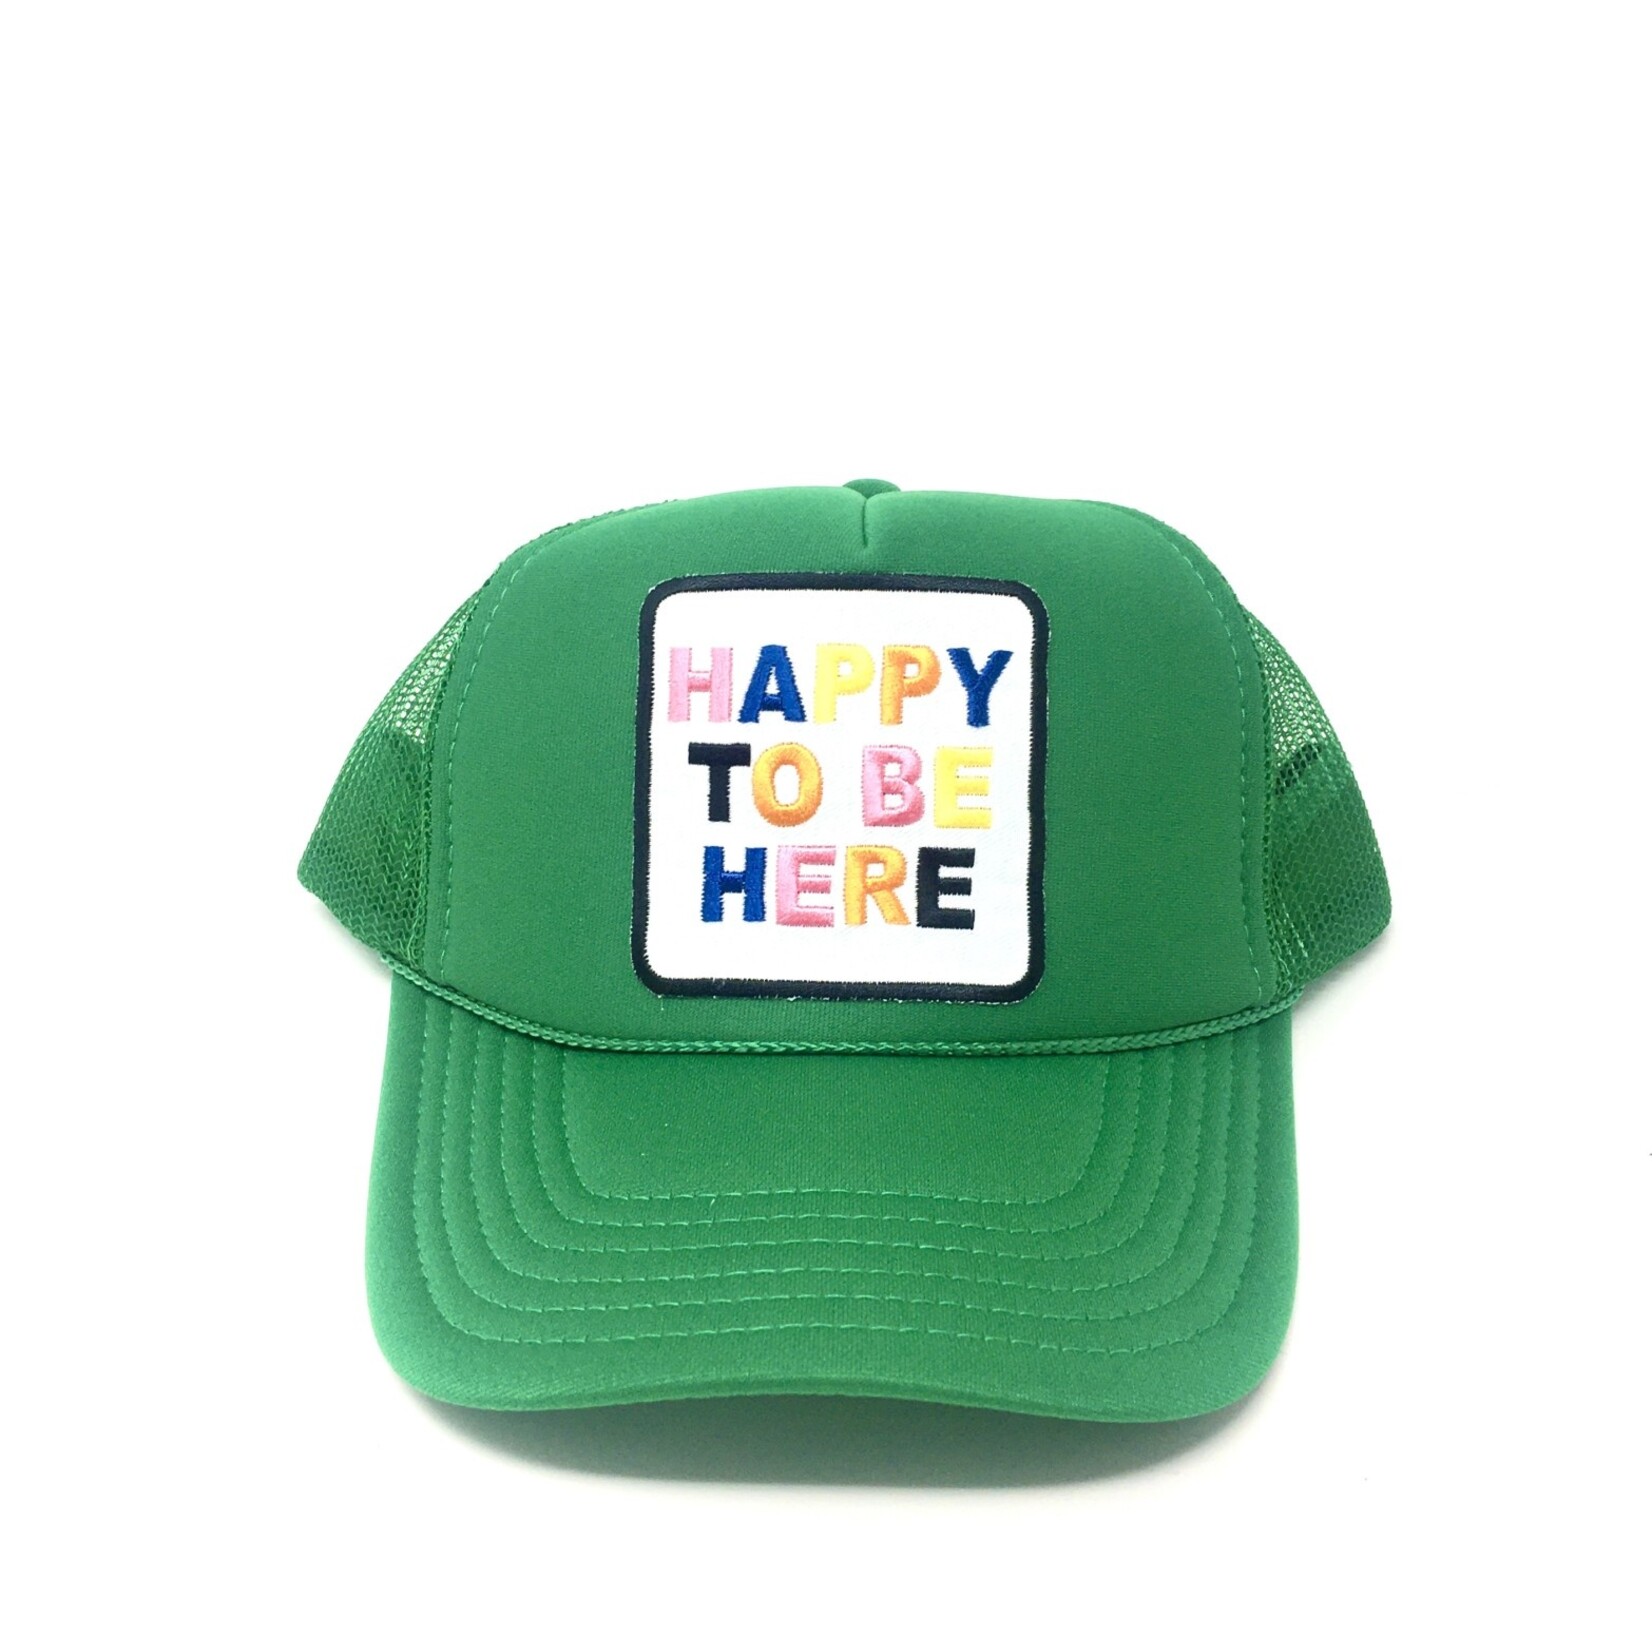 Après Babe “Happy to be here” Trucker Hats